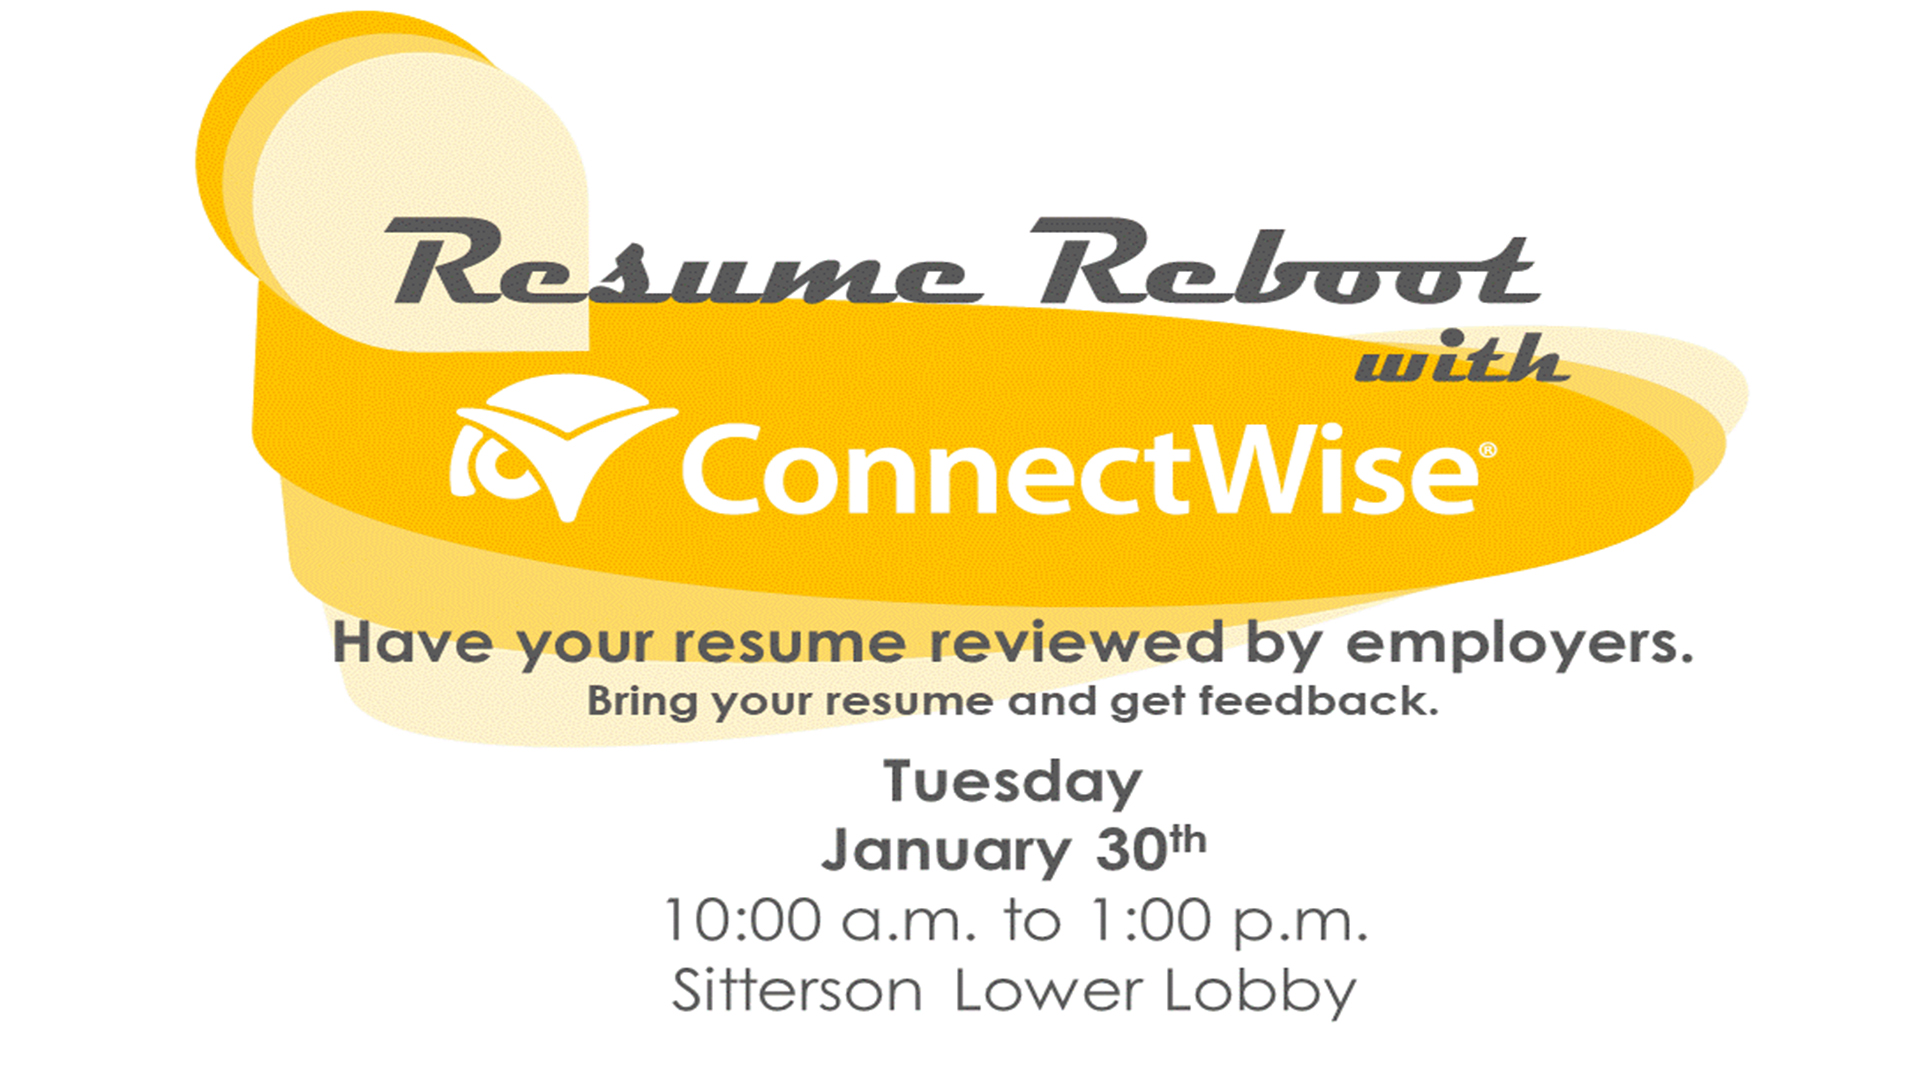 Resume Reboot with ConnectWise